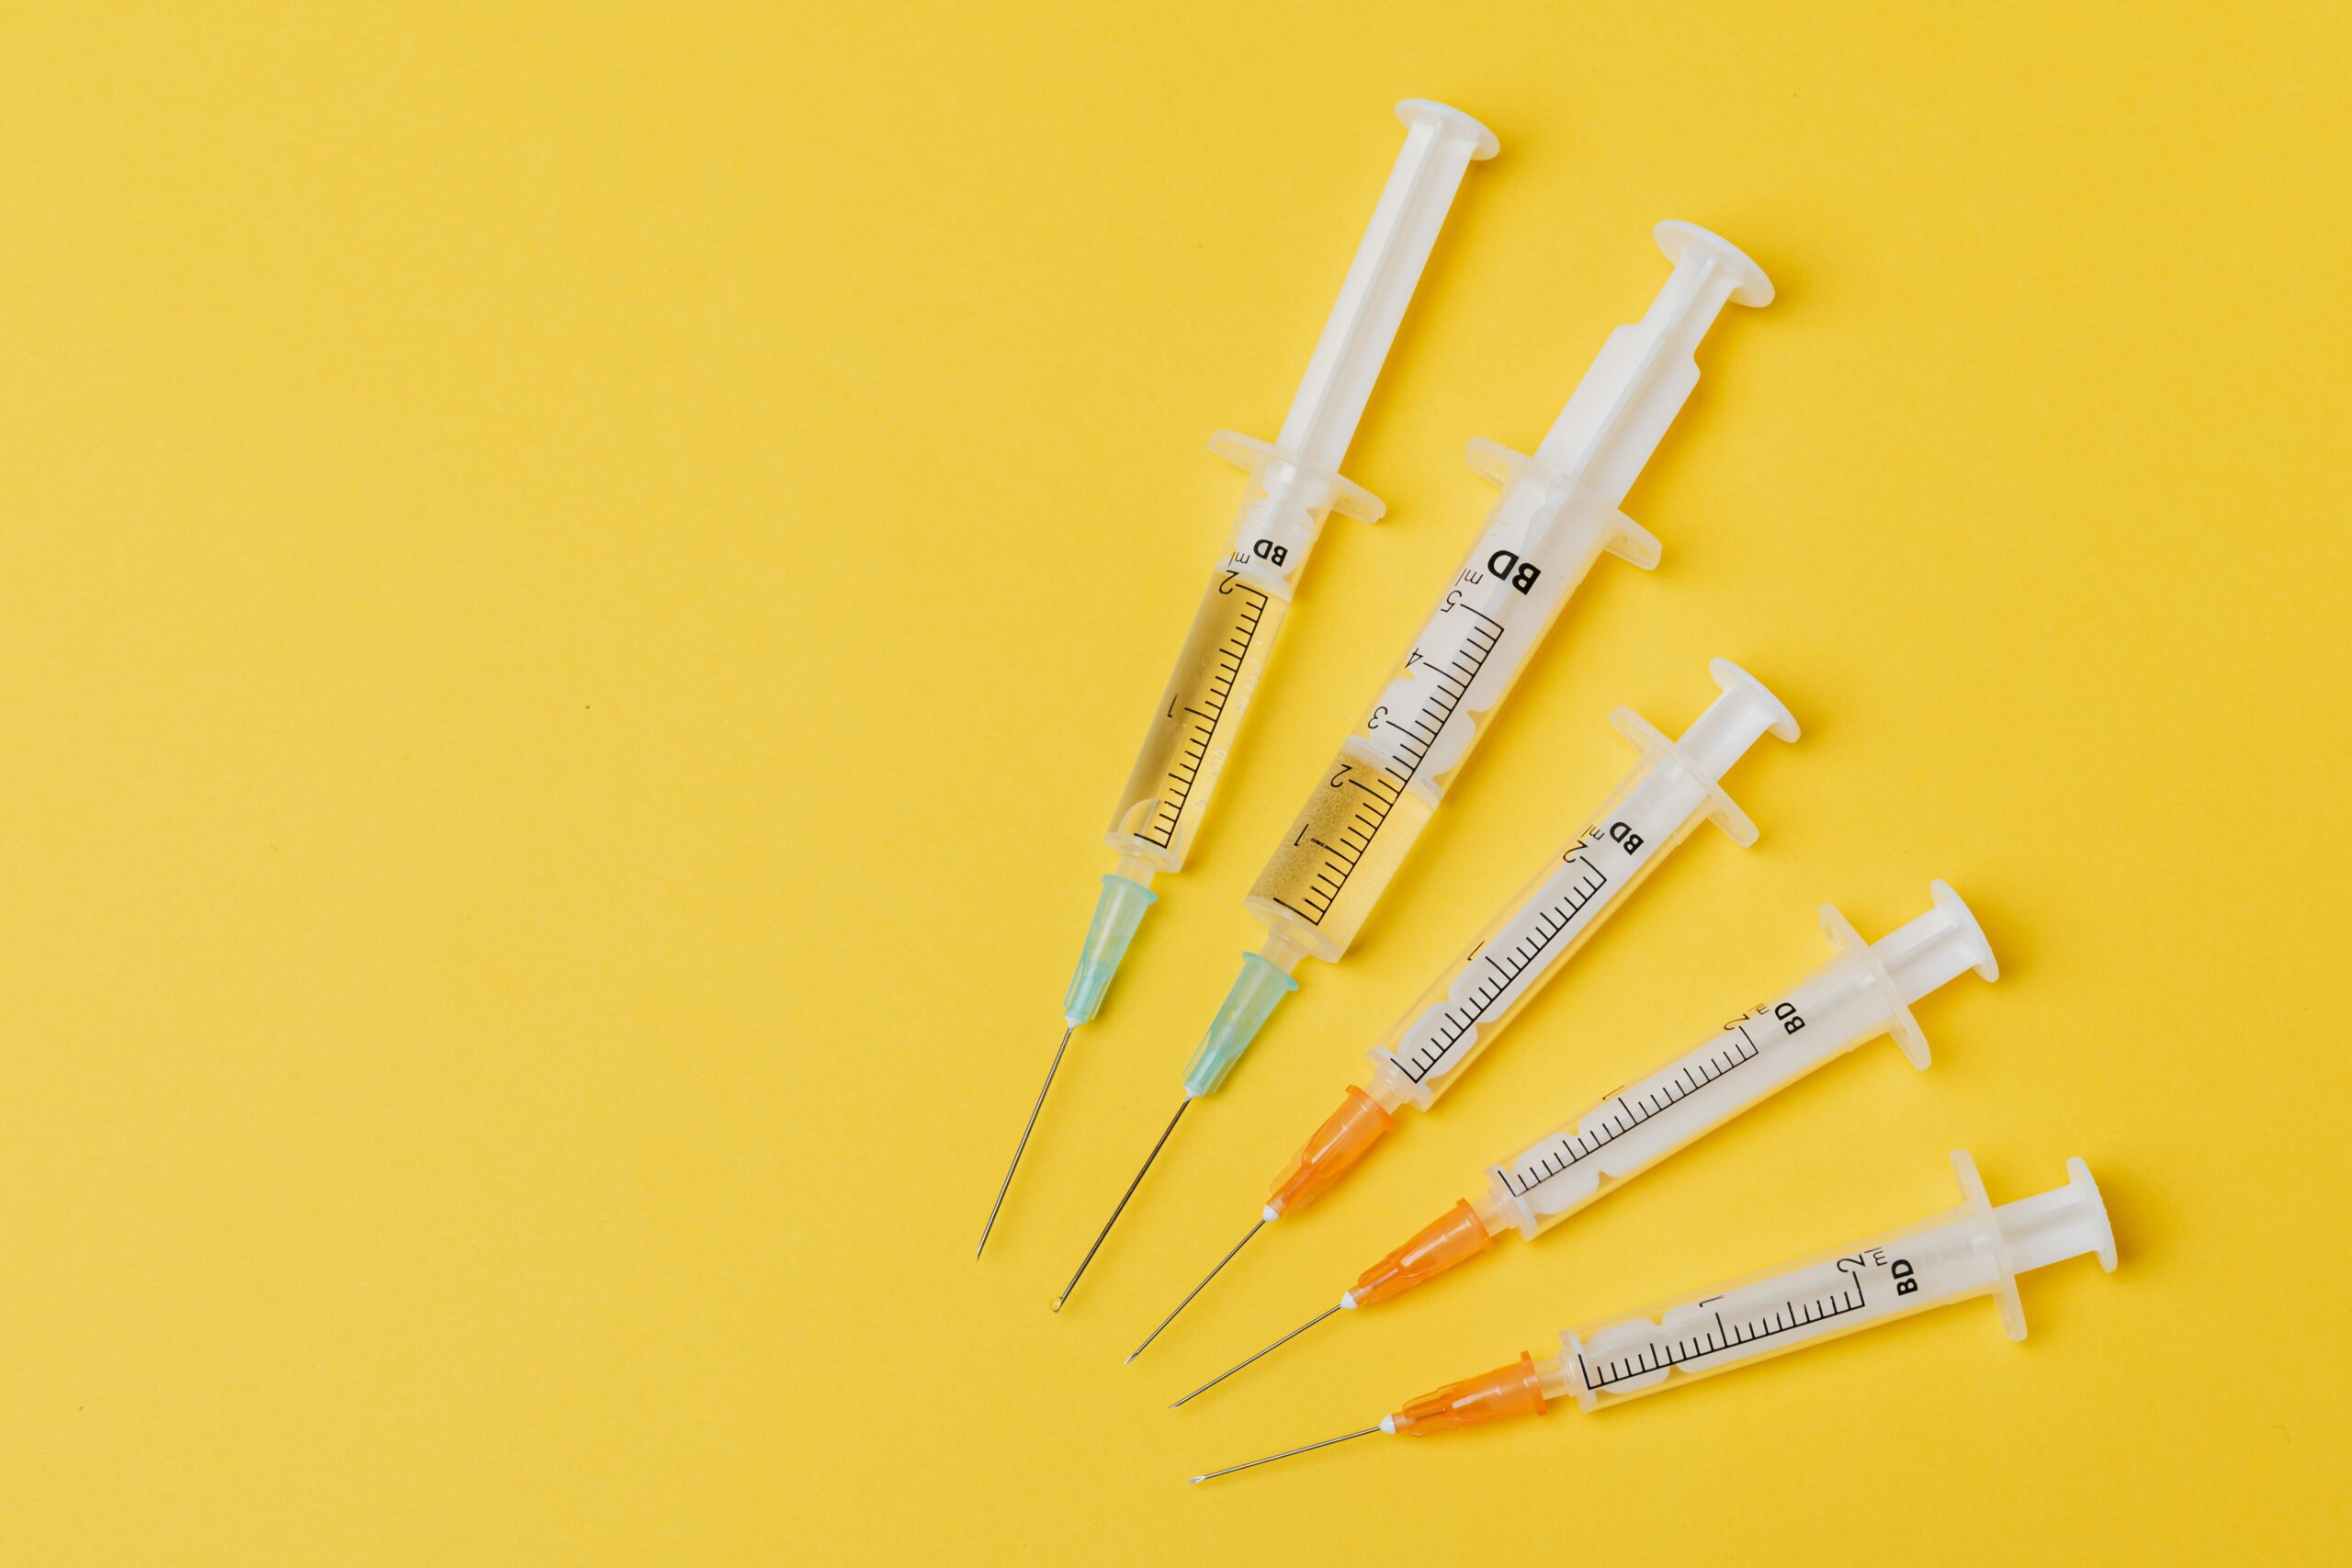 Vaccine needles representing vaccine exemptions in unionized workplaces